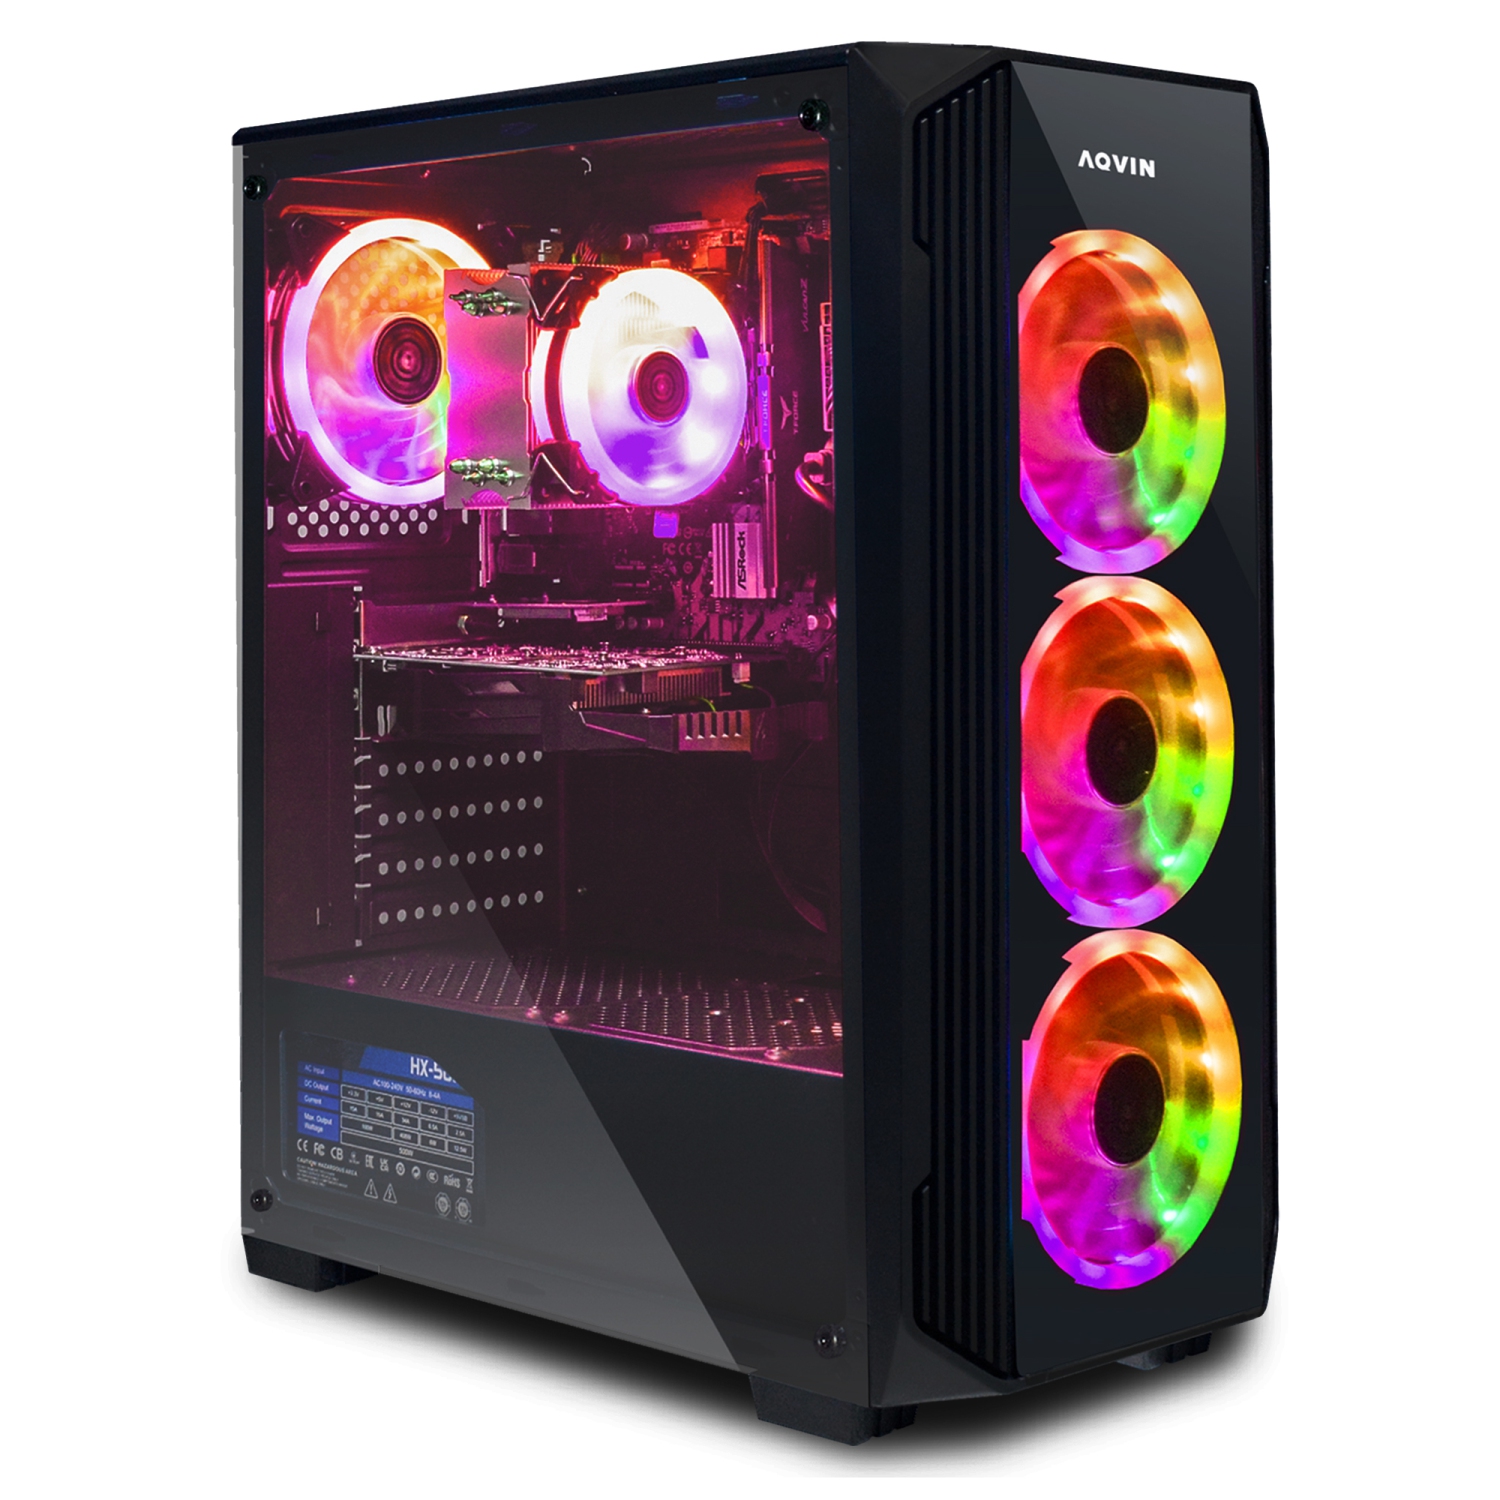 AQVIN ZForce Tower Desktop Computer Gaming PC - RGB (Intel Core i5/ 32GB DDR4 RAM/ 2TB SSD (fast boot)/ GeForce GTX 1660 Super 6GB/ Windows 11/ Gaming Keyboard and Mouse/ WIFI)